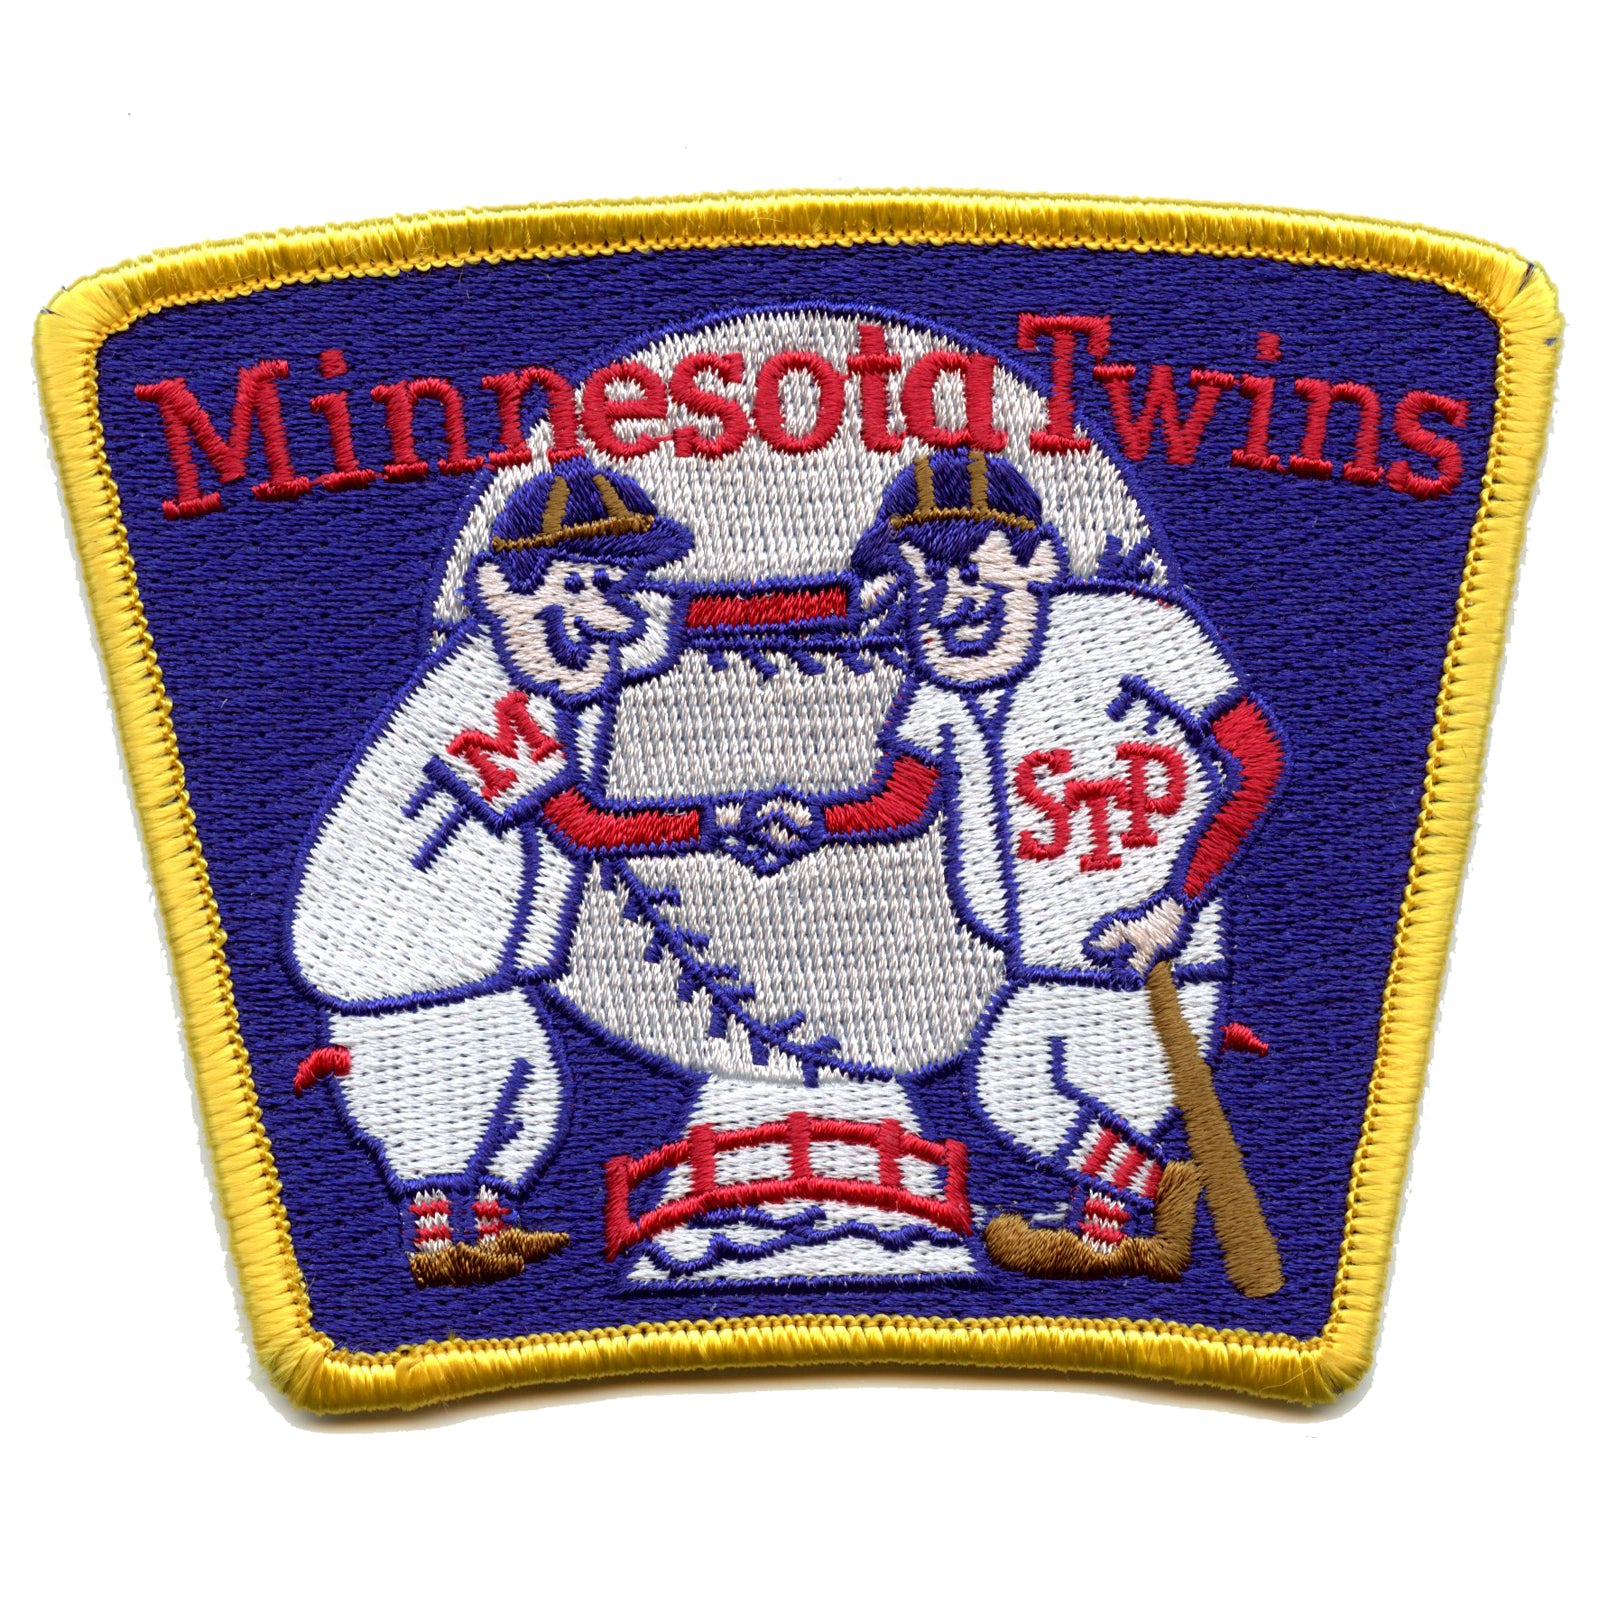 1972 MINNESOTA TWINS OFFICIAL MLB BASEBALL THROWBACK JERSEY PATCH LOST  TREASURES